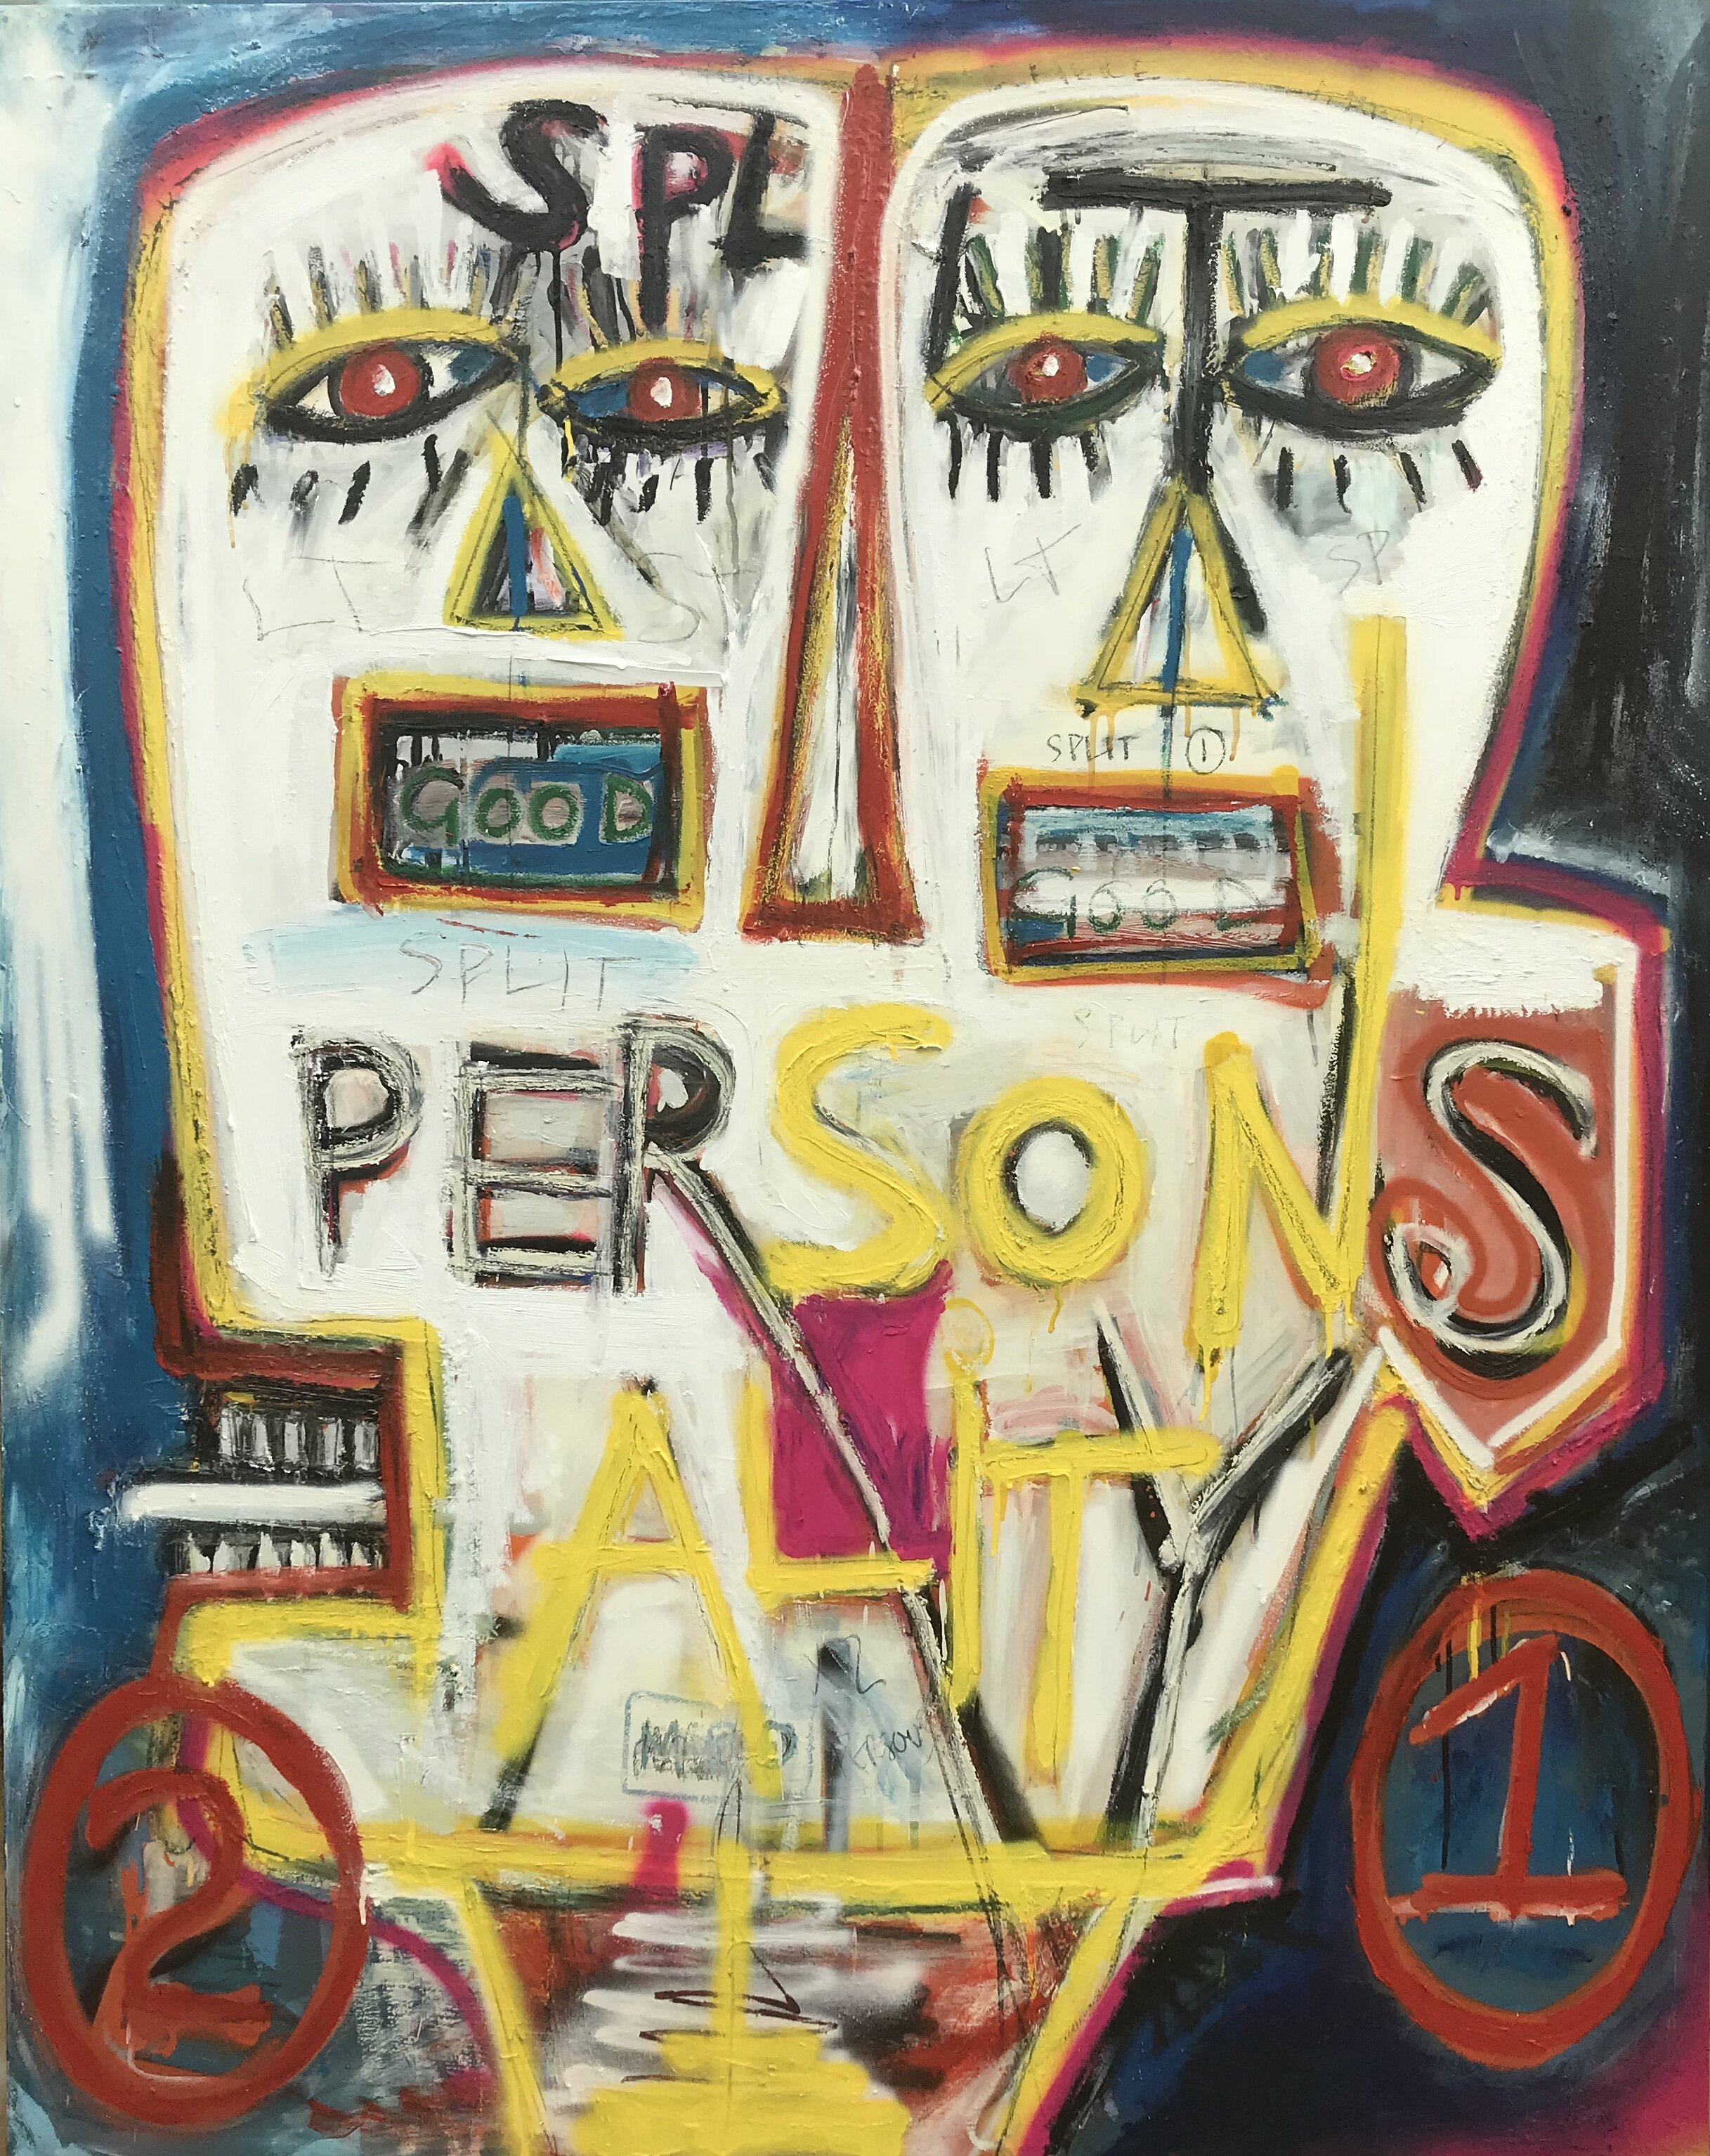 "Split Persons-ality" as an artist married to an identical twin, PIGSY was inspired to create this painting about twins (Copy) (Copy) (Copy)